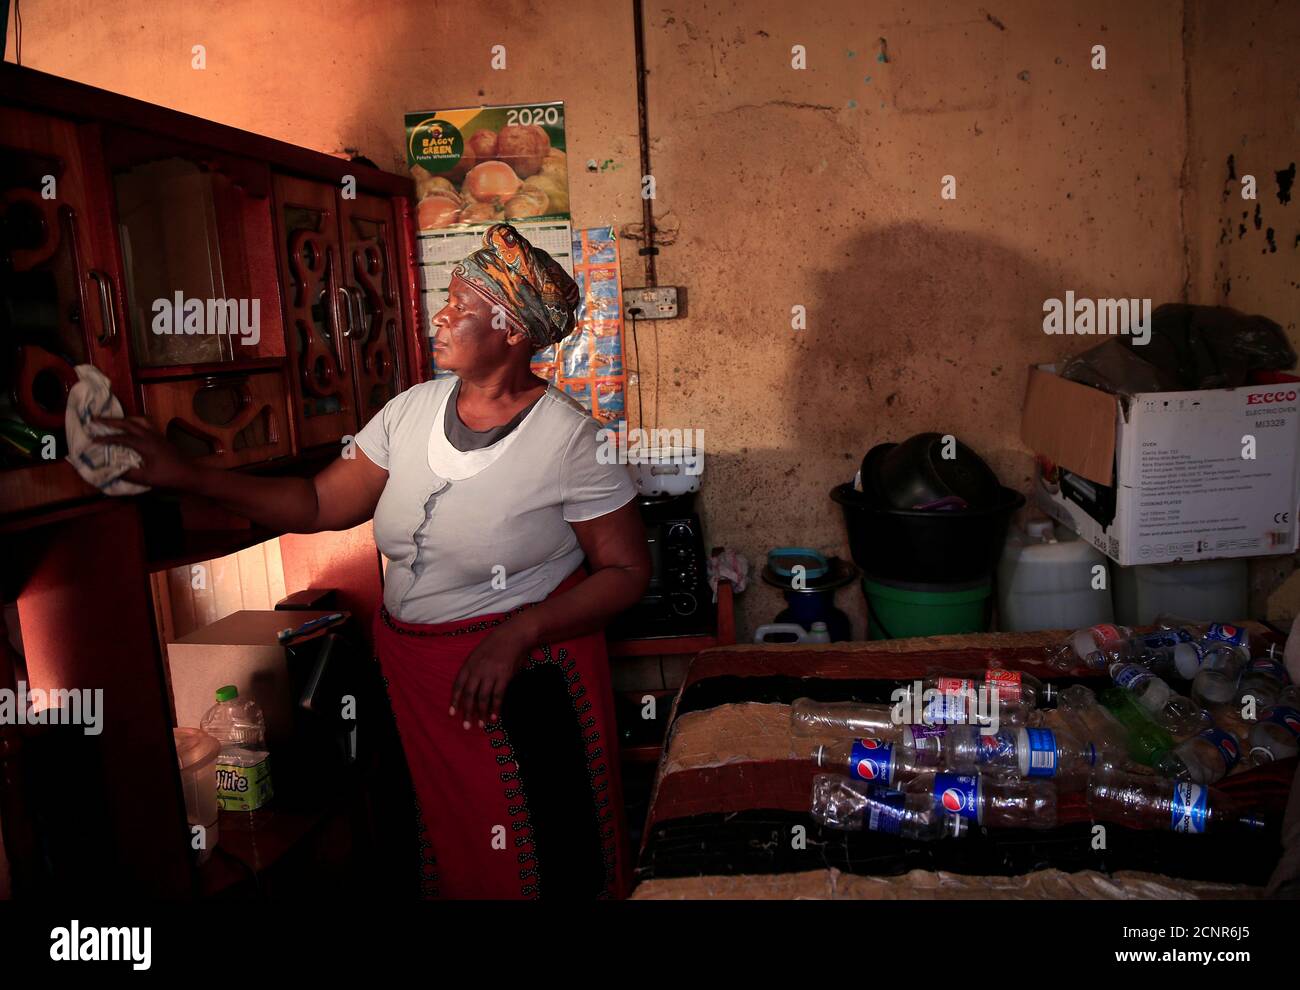 Rosemary Pamire cleans her home during a nationwide lockdown to help curb the coronavirus disease (COVID-19) spread in Harare, Zimbabwe, May 9, 2020. Picture taken May 9, 2020. REUTERS/Philimon Bulawayo Stock Photo